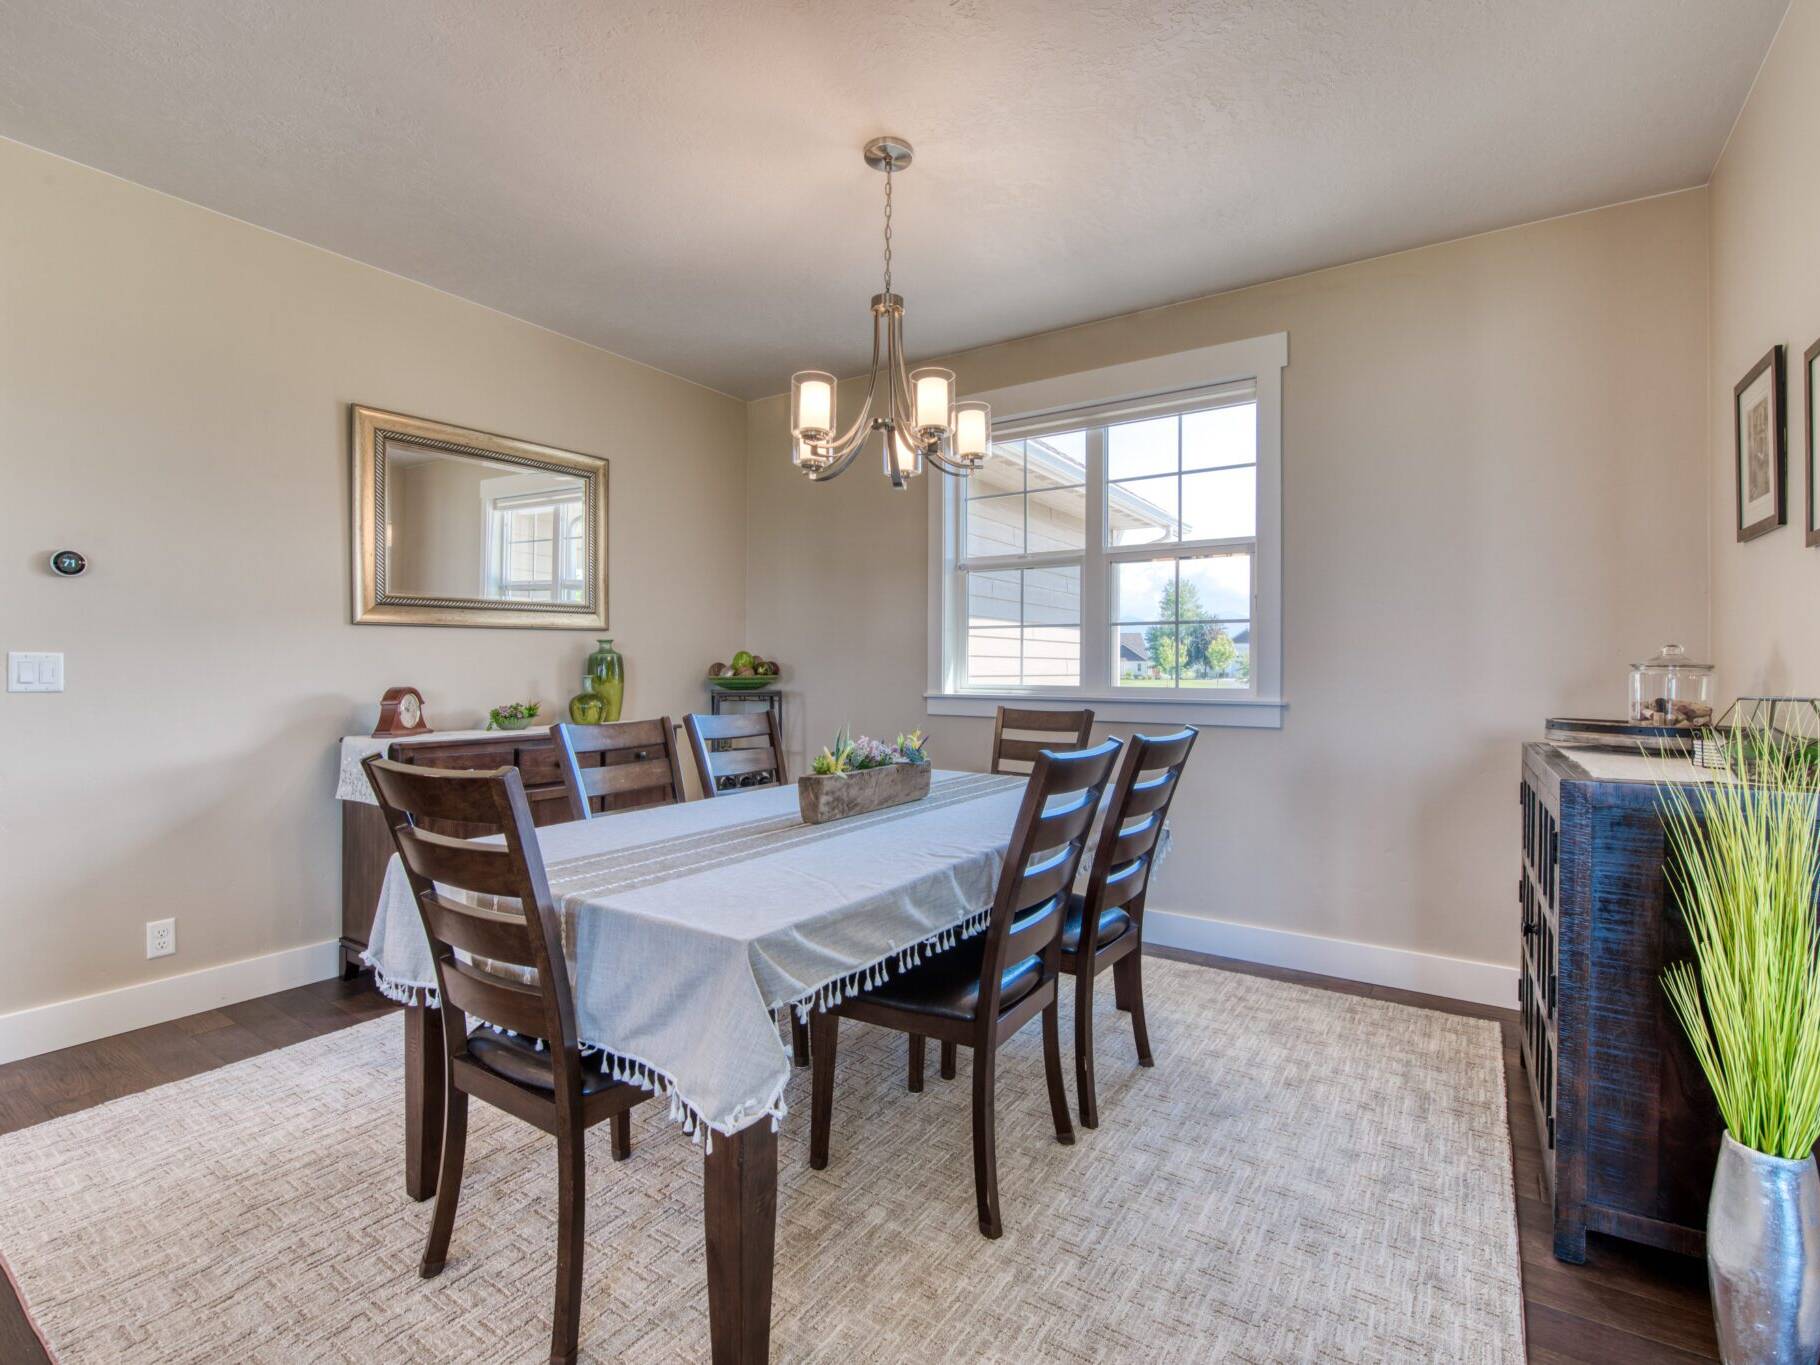 Dining room in a custom home built by Big Sky Builders of Monana in Hamilton, MT